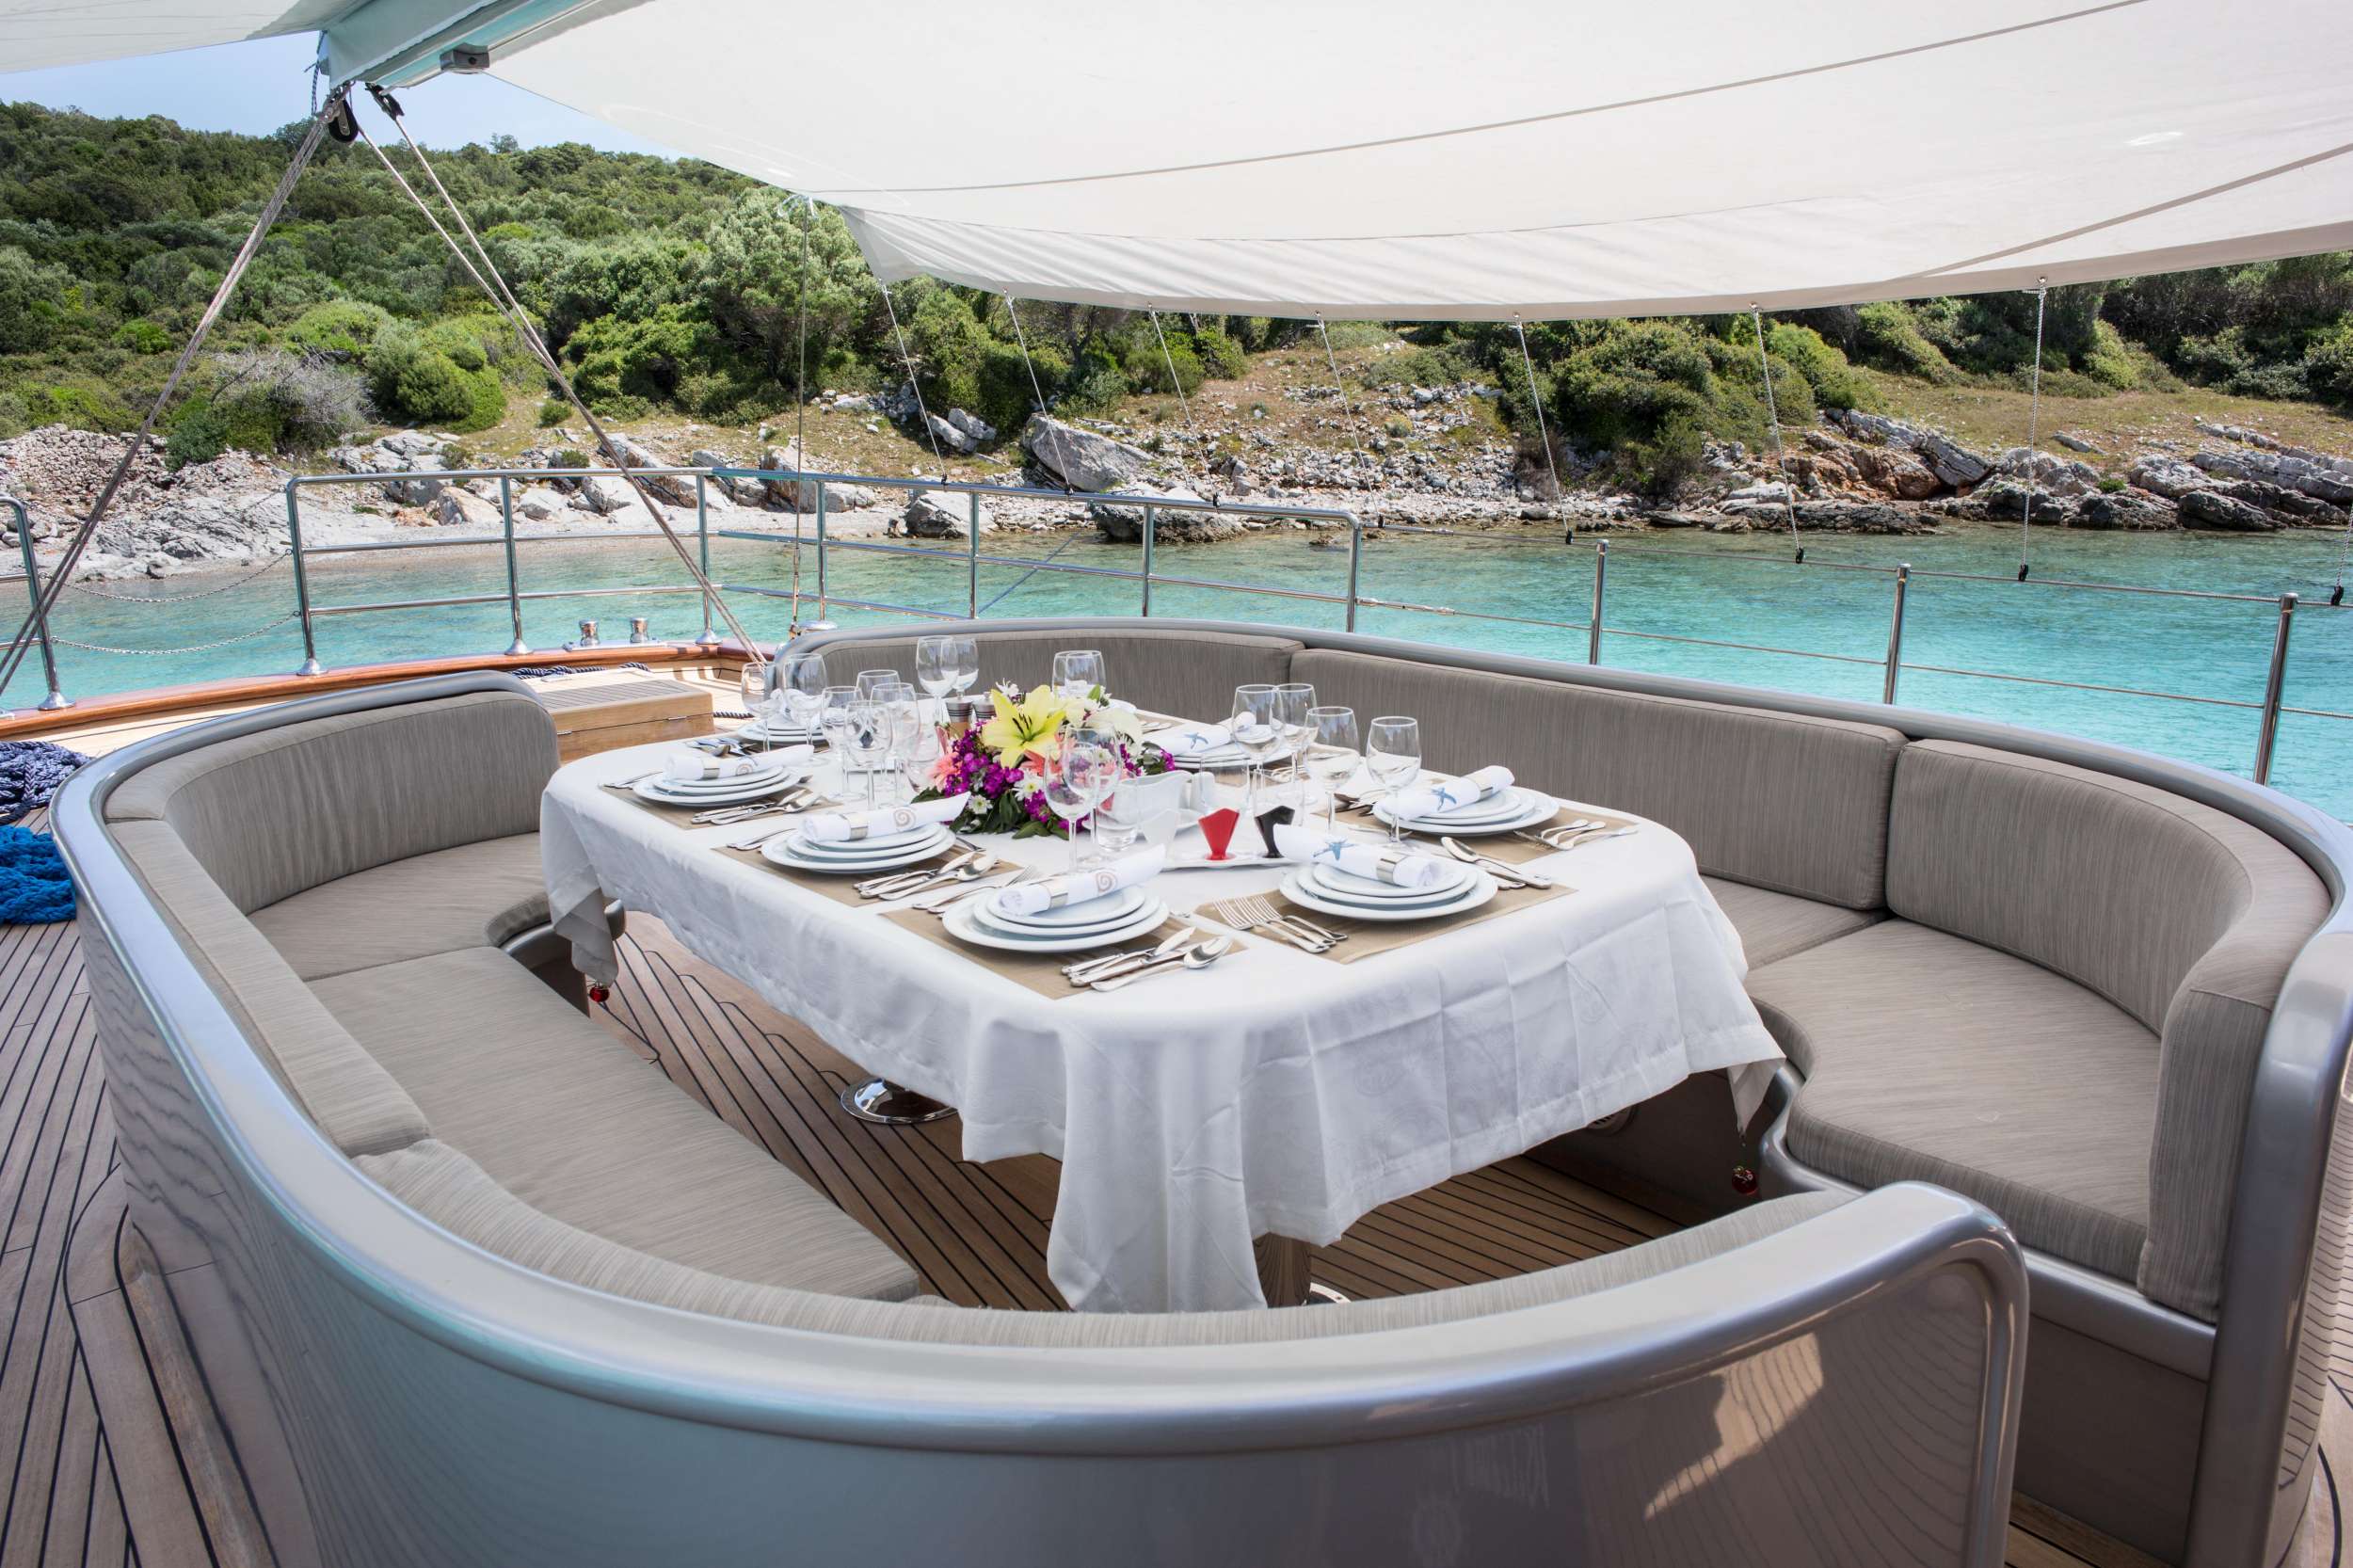 LE PIETRE - Yacht Charter Cyprus & Boat hire in East Mediterranean 5